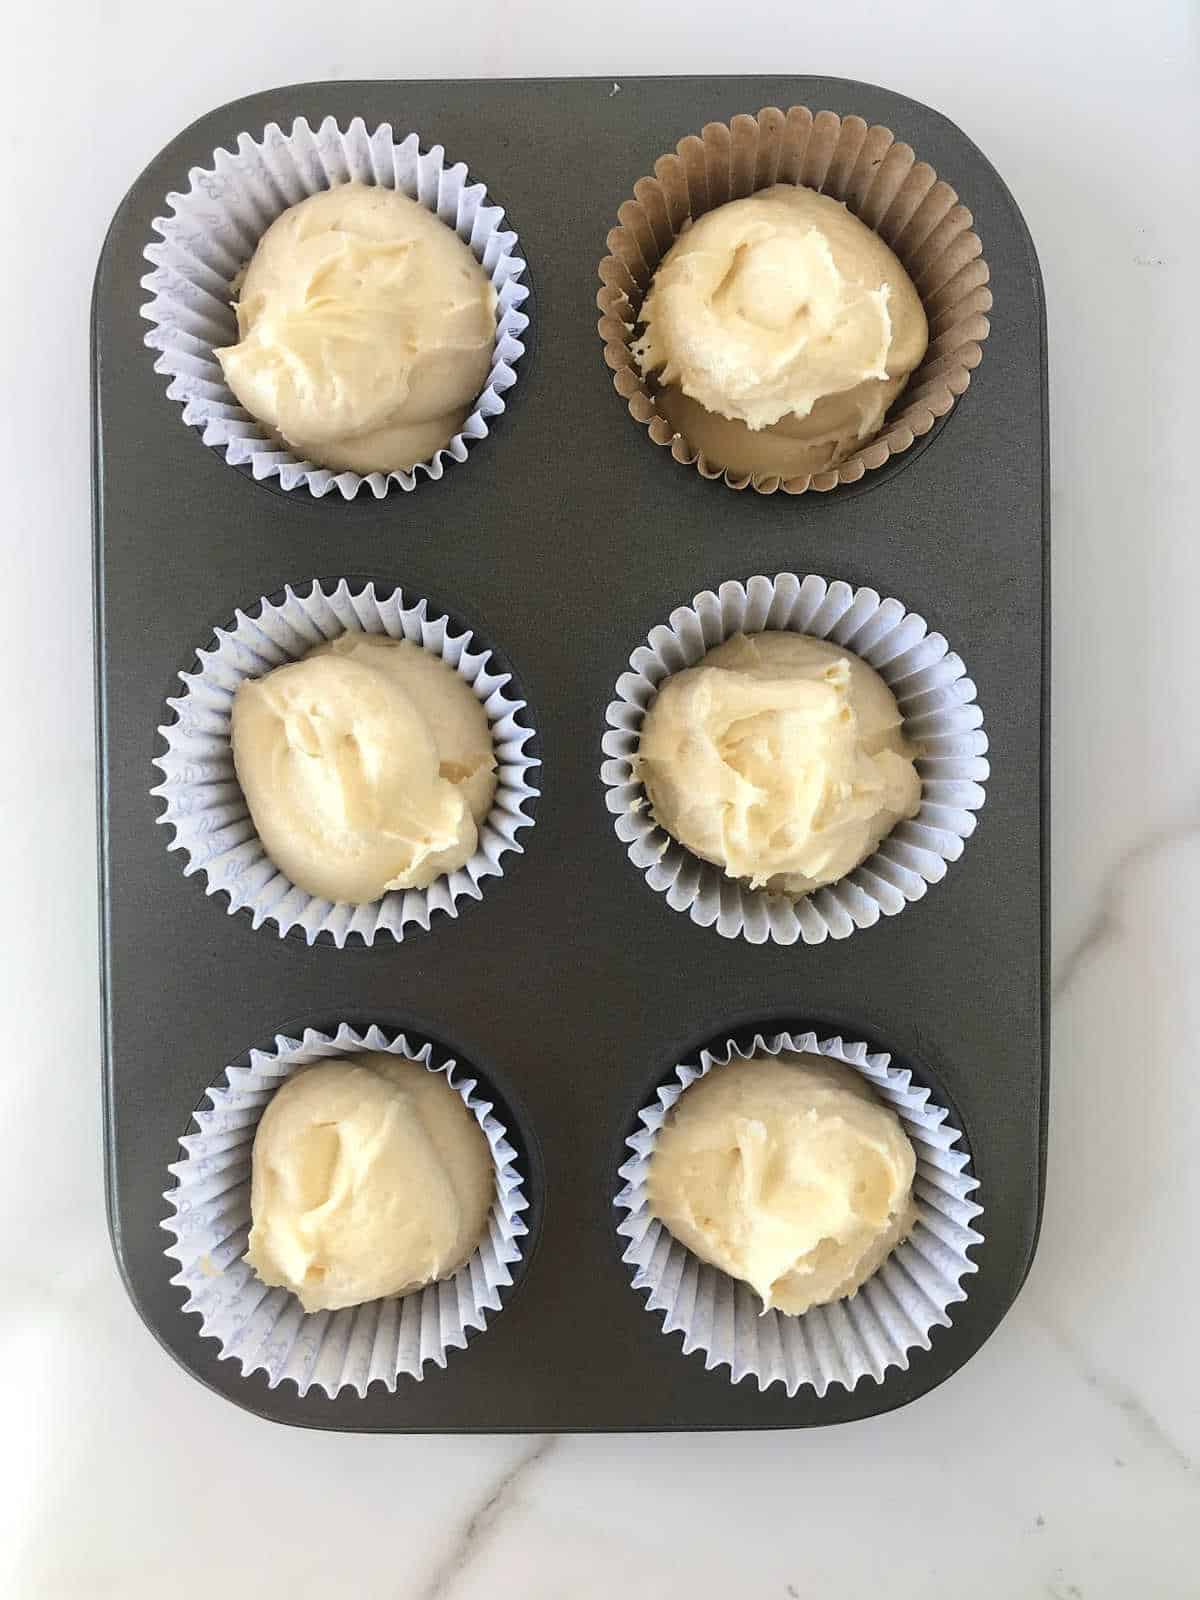 Vanilla cake batter in paper liners in a dark muffin tin. White marbled surface. 